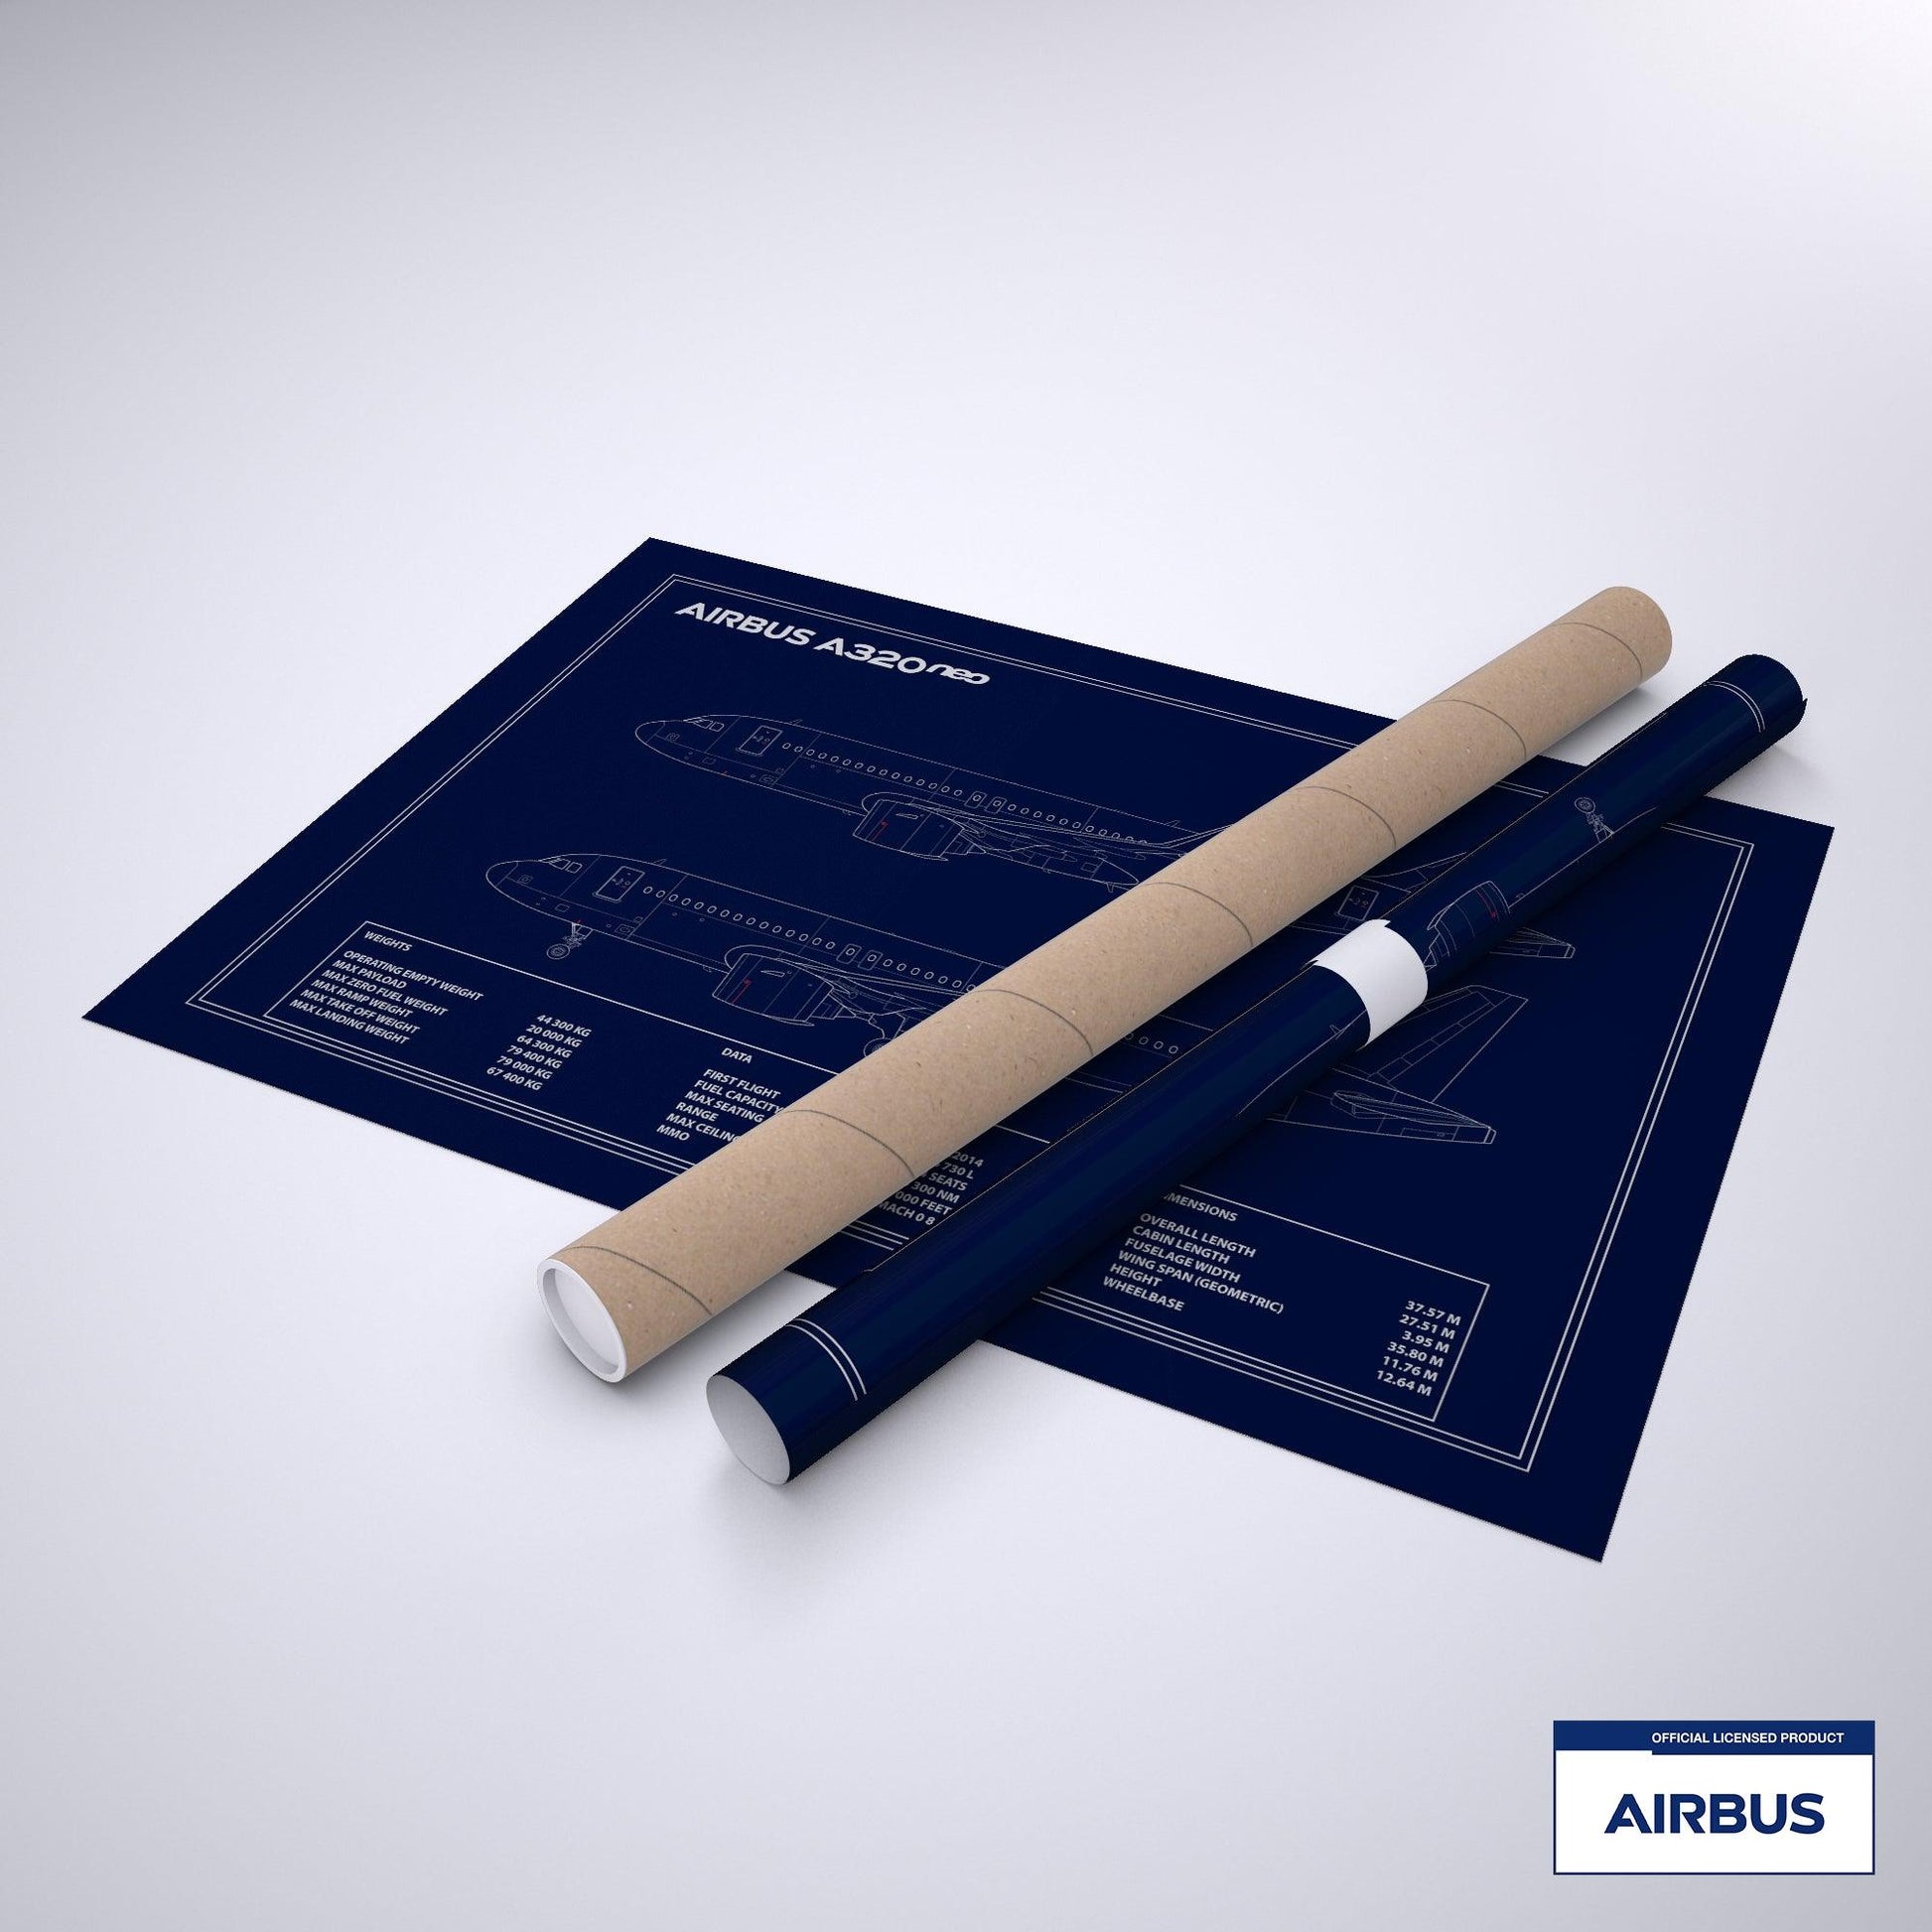 Airbus A320 neo Blueprint Poster